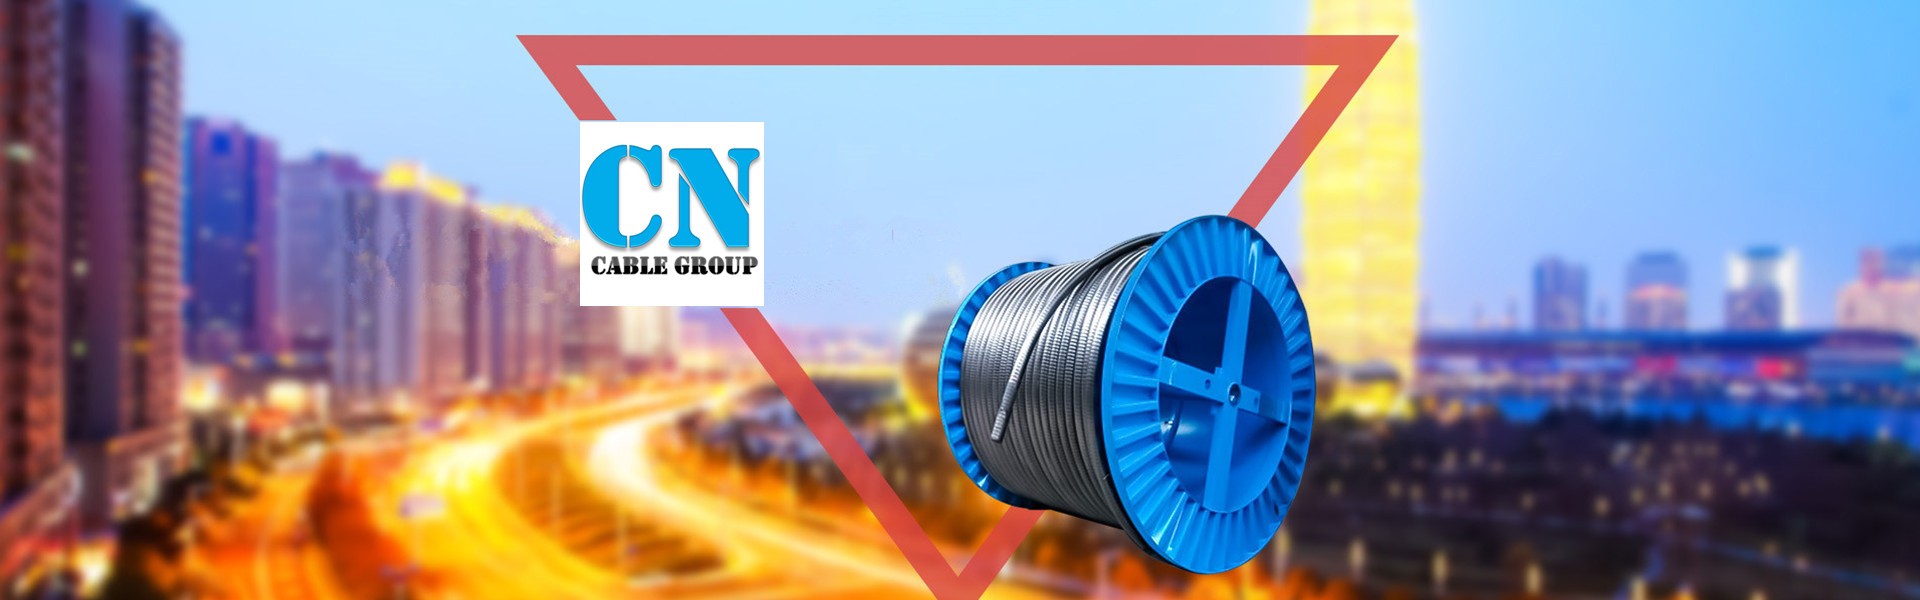 CN CABLE GROUP CO., LTD